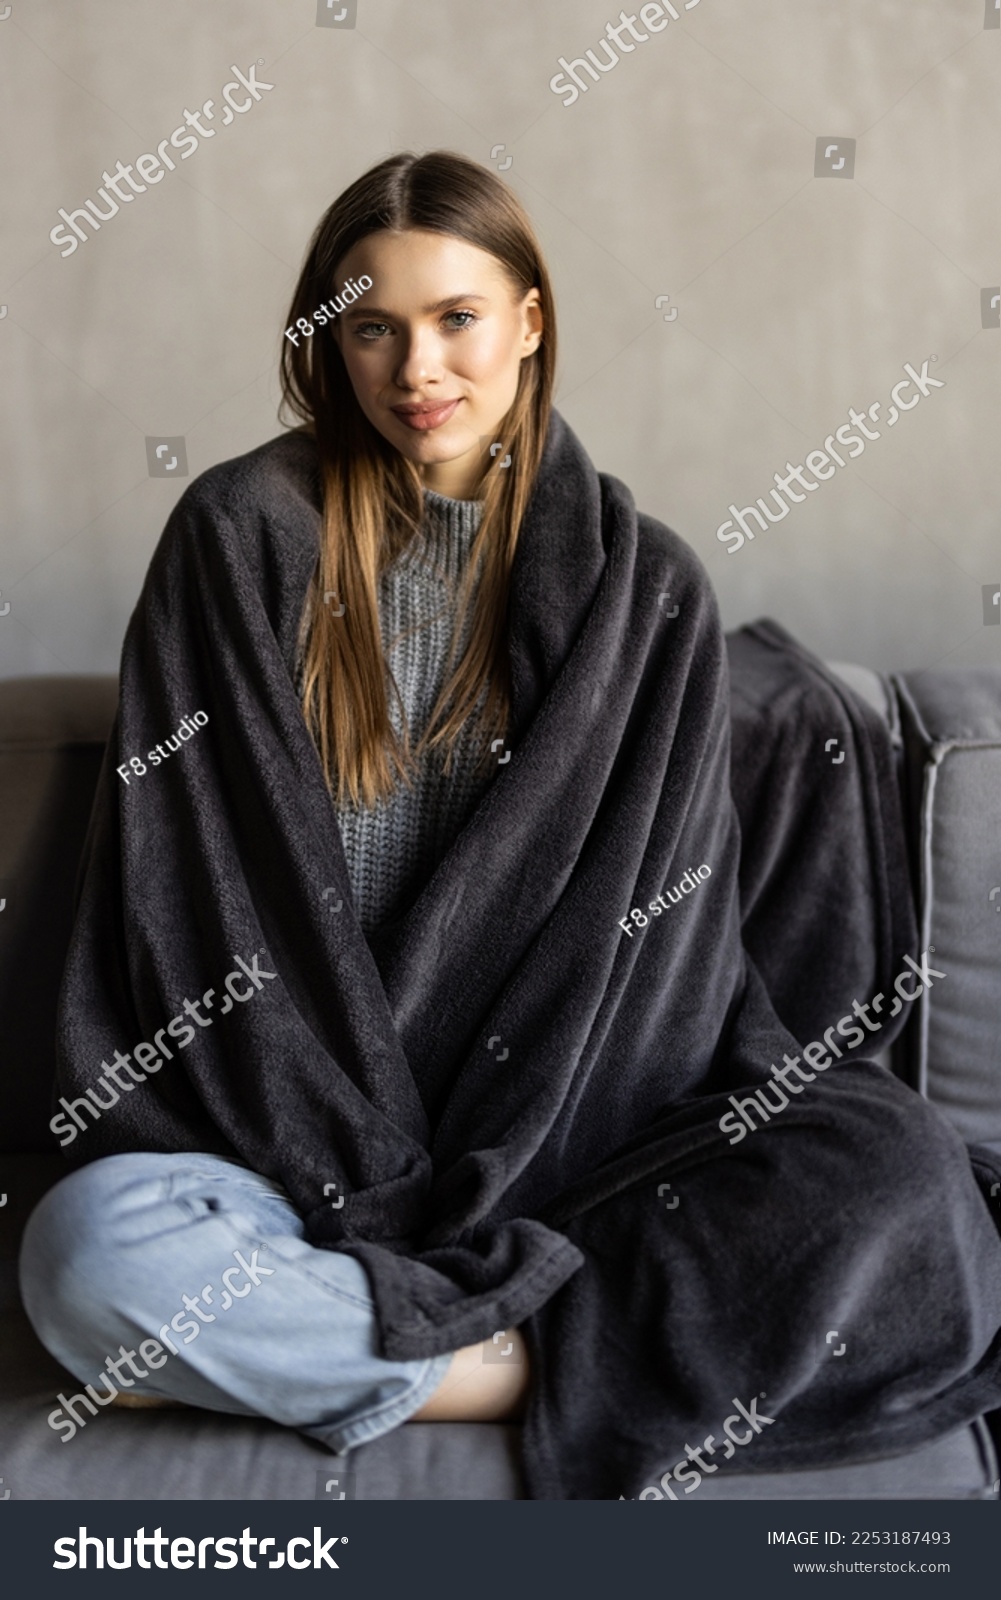 Young woman having a rest. Wrapped up in white blanket and drinking coffee in warm atmosphere, copy space #2253187493